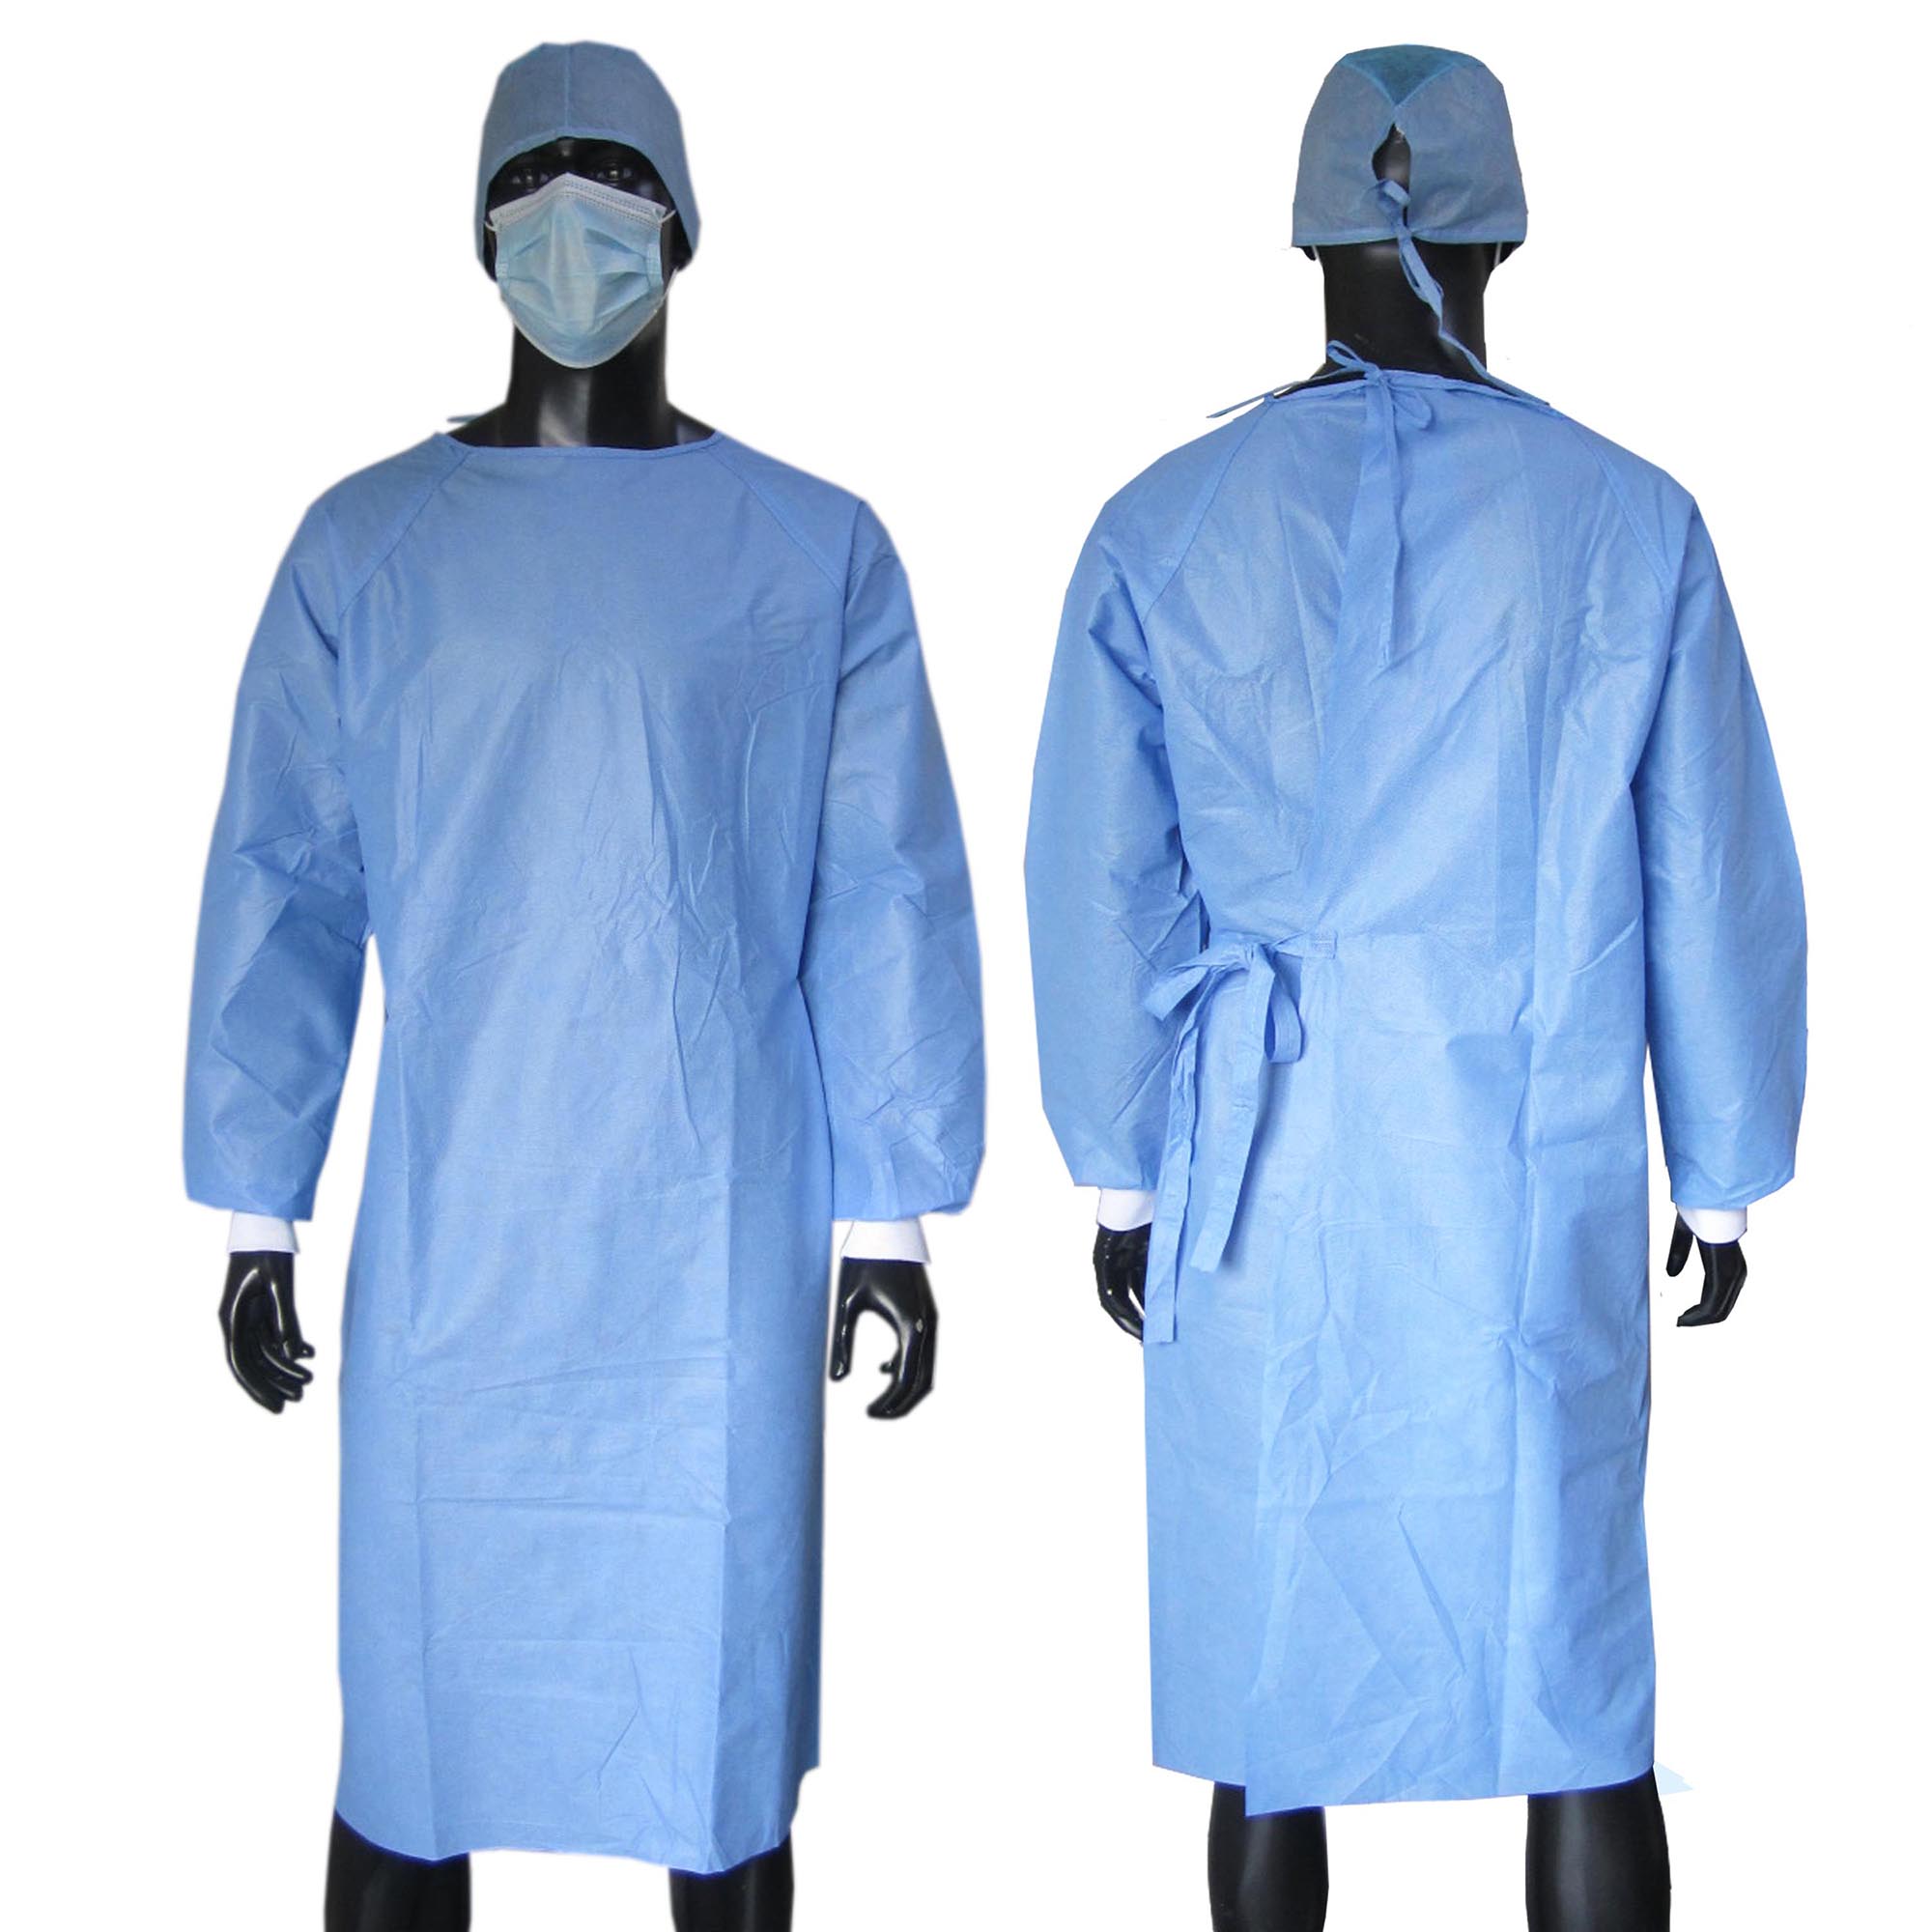 Woodpulp spunlace disposable full reinforced surgical gowns 